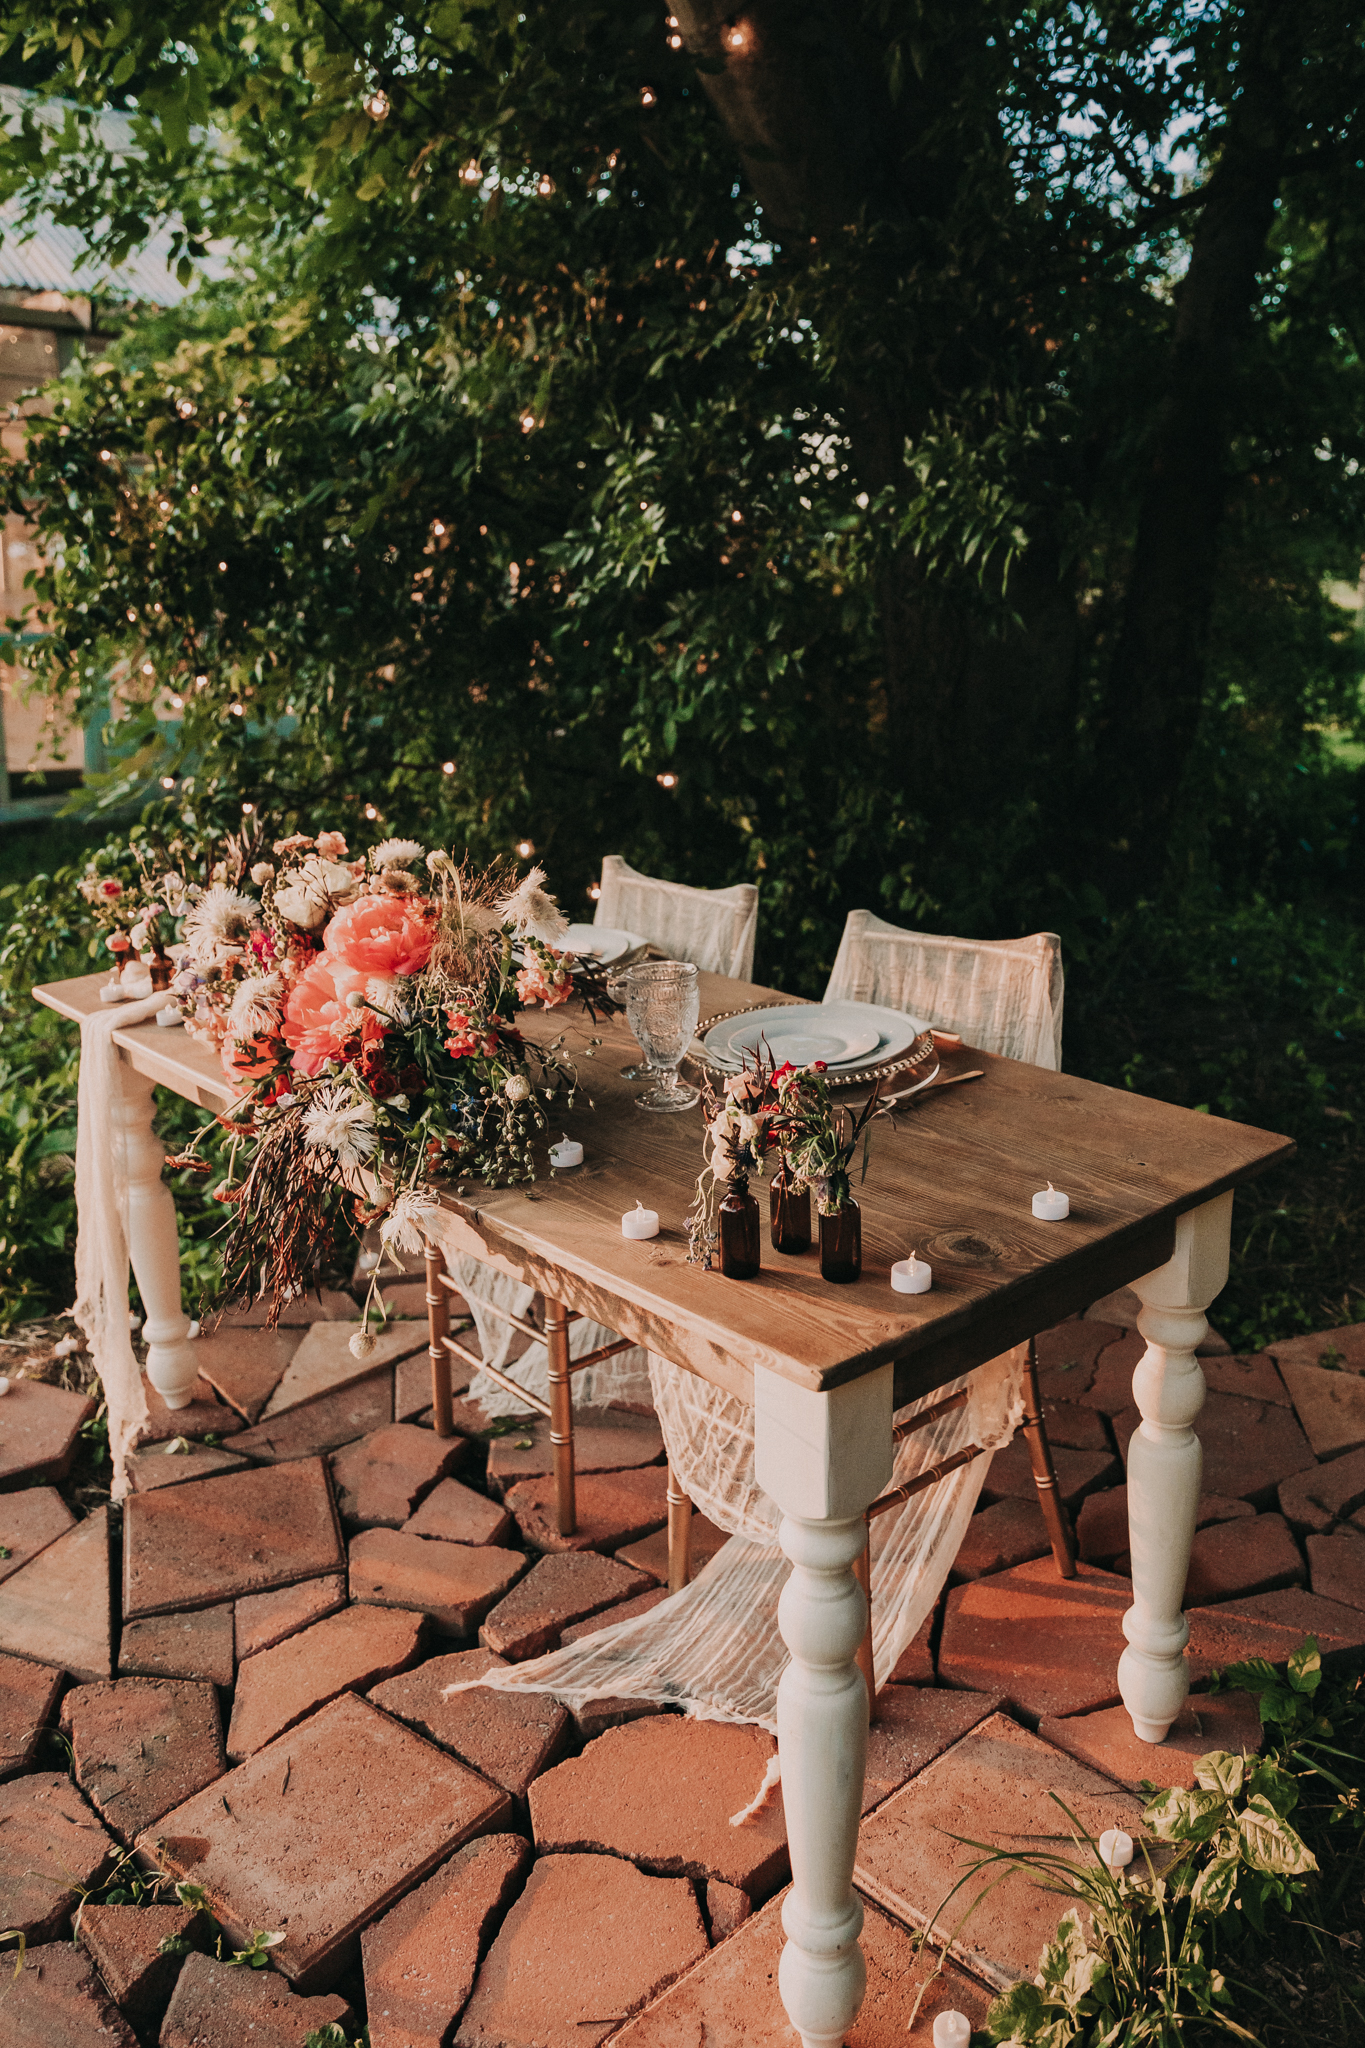 Outdoor wedding reception table: Flower Farm Styled Shoot by Billie-Shaye Style featured on Nashville Bride Guide